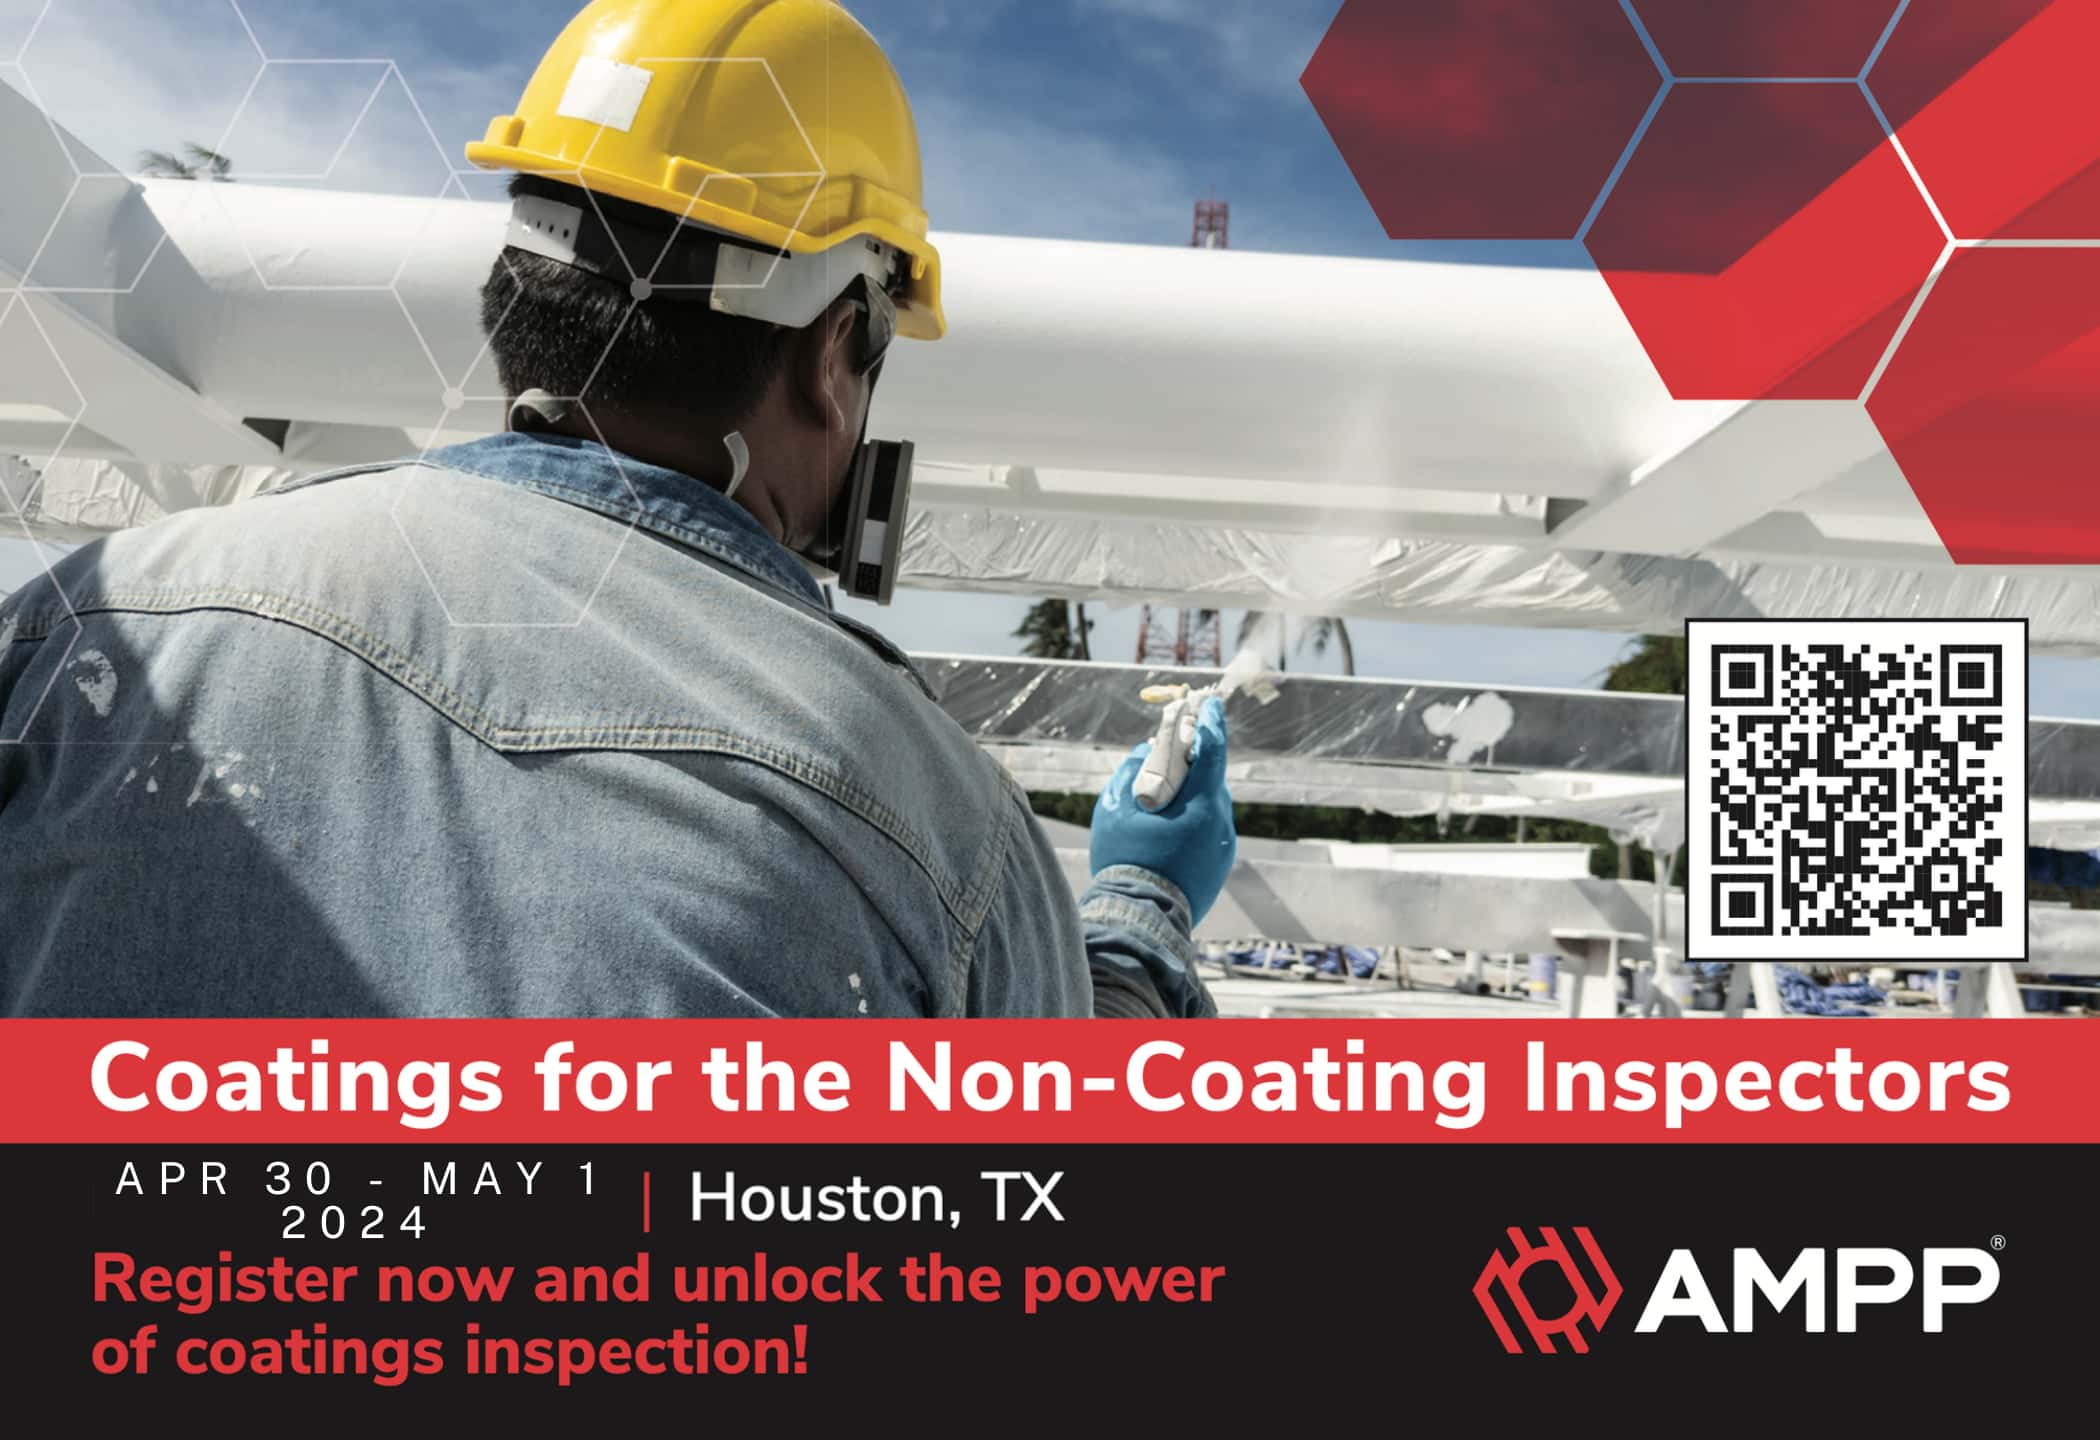 Register Now for AMPP Coatings for the NonCoating Inspectors April 30